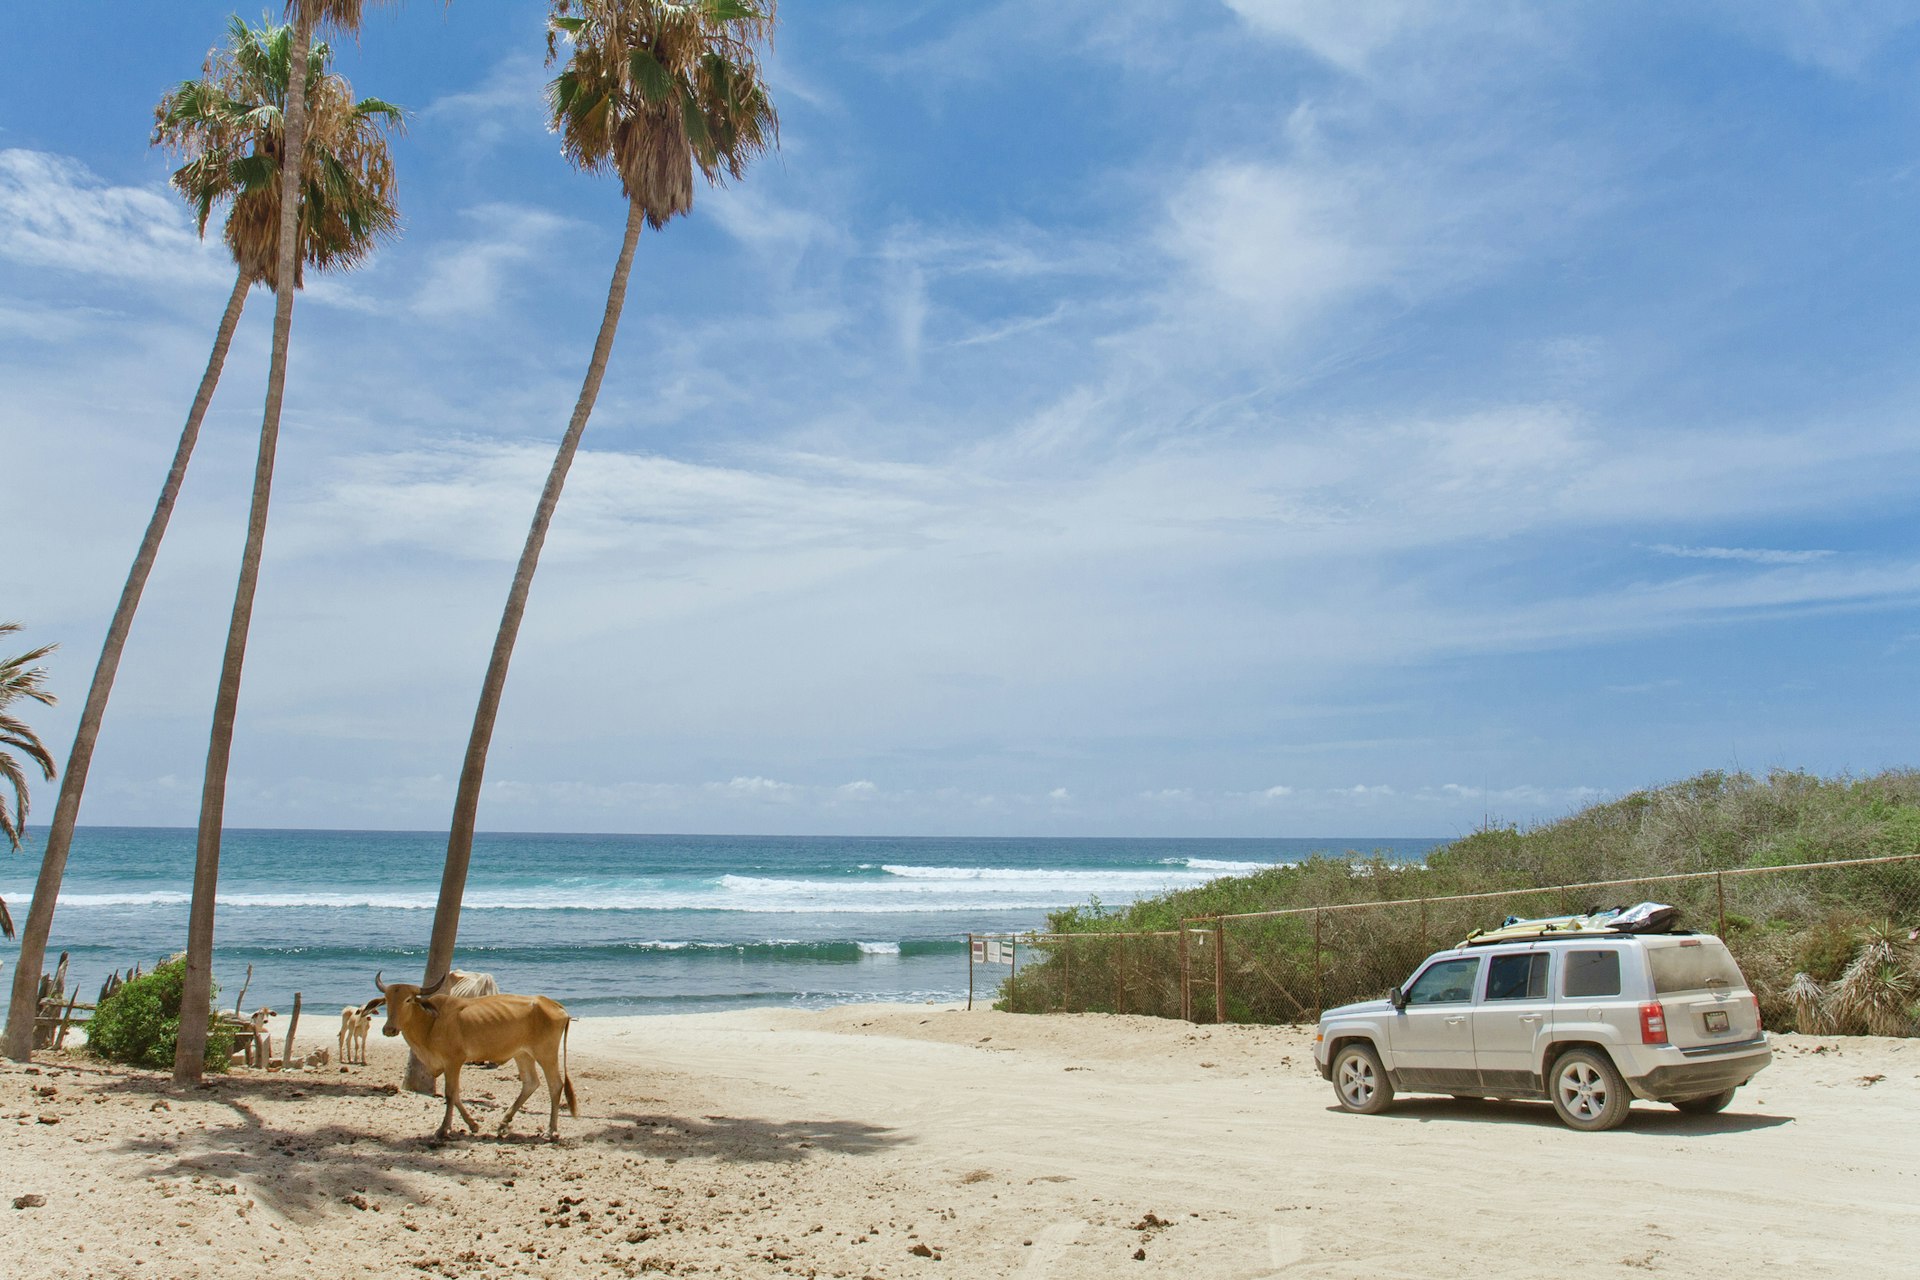 A silver SUV parked on a gravel road next to a surfing beach. Cows take cover in the shade of a nearby palm tree.